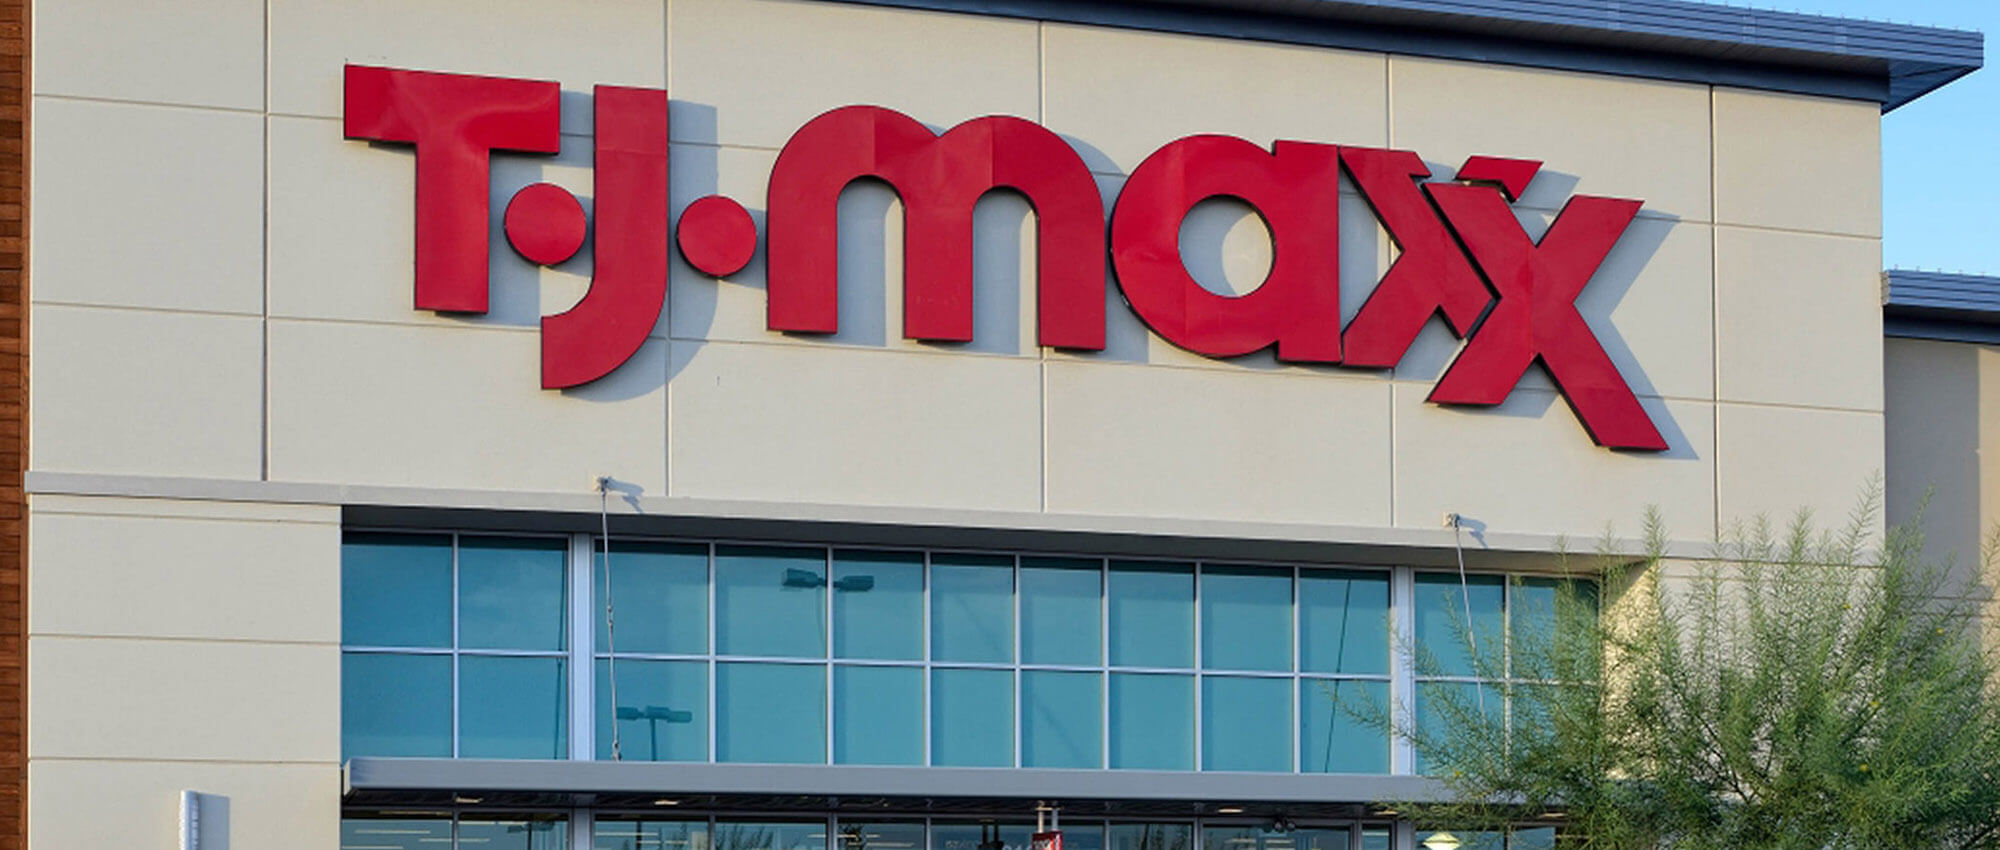 T.J. Maxx to open at Park West Place in Stockton